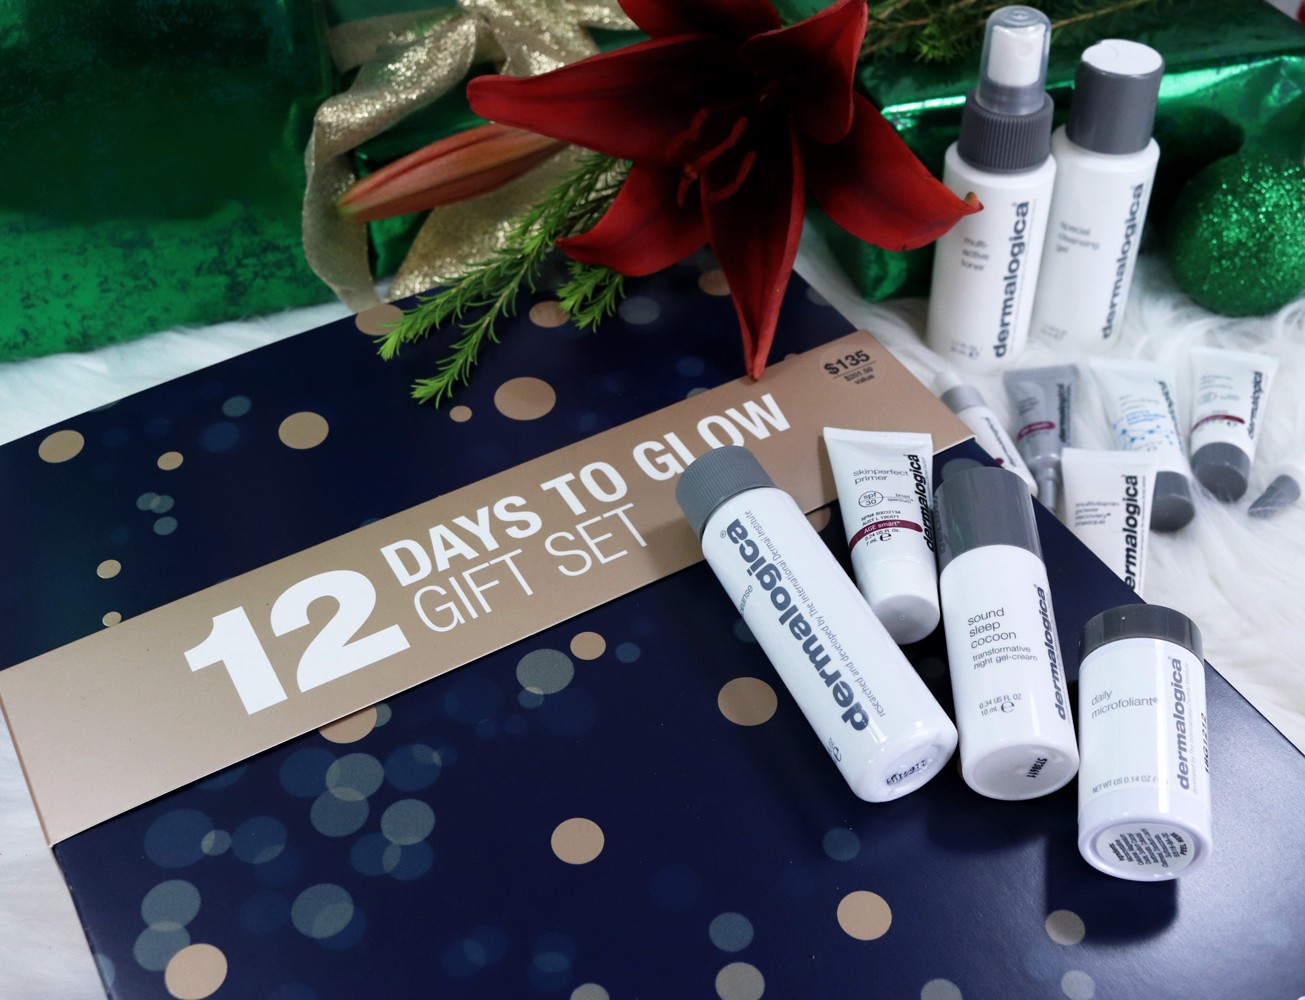 Cruelty Free Holiday Gift Guide - Dermalogica 12 Days to Glow Gift Set